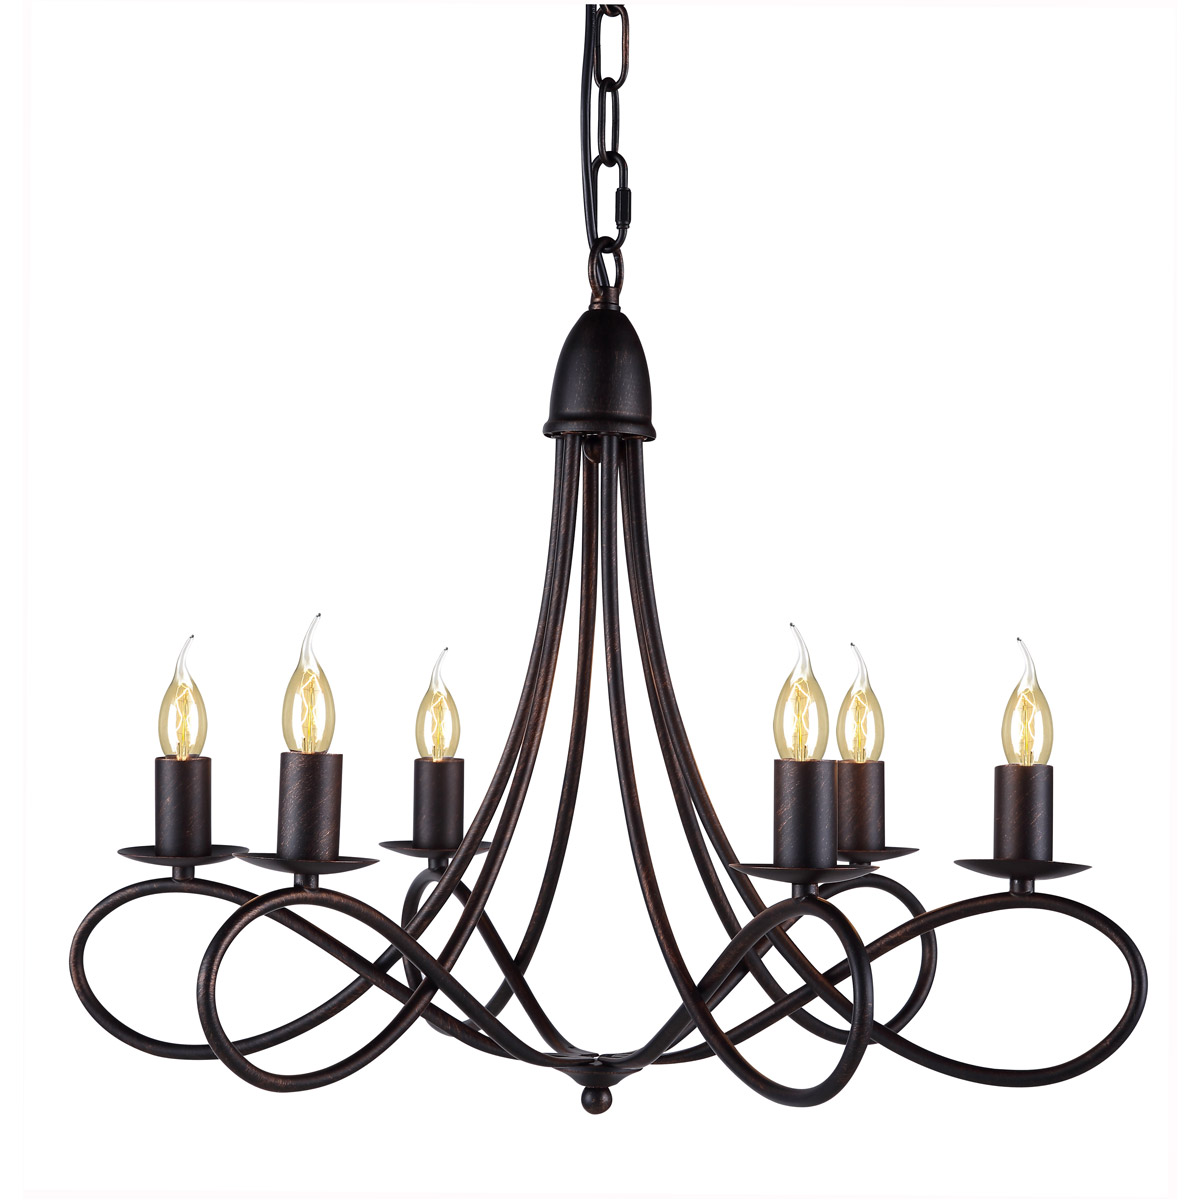 Details About Chandelier Dark Bronze Wrought Iron Cottage Country Farm Dining Room 6 Light 24